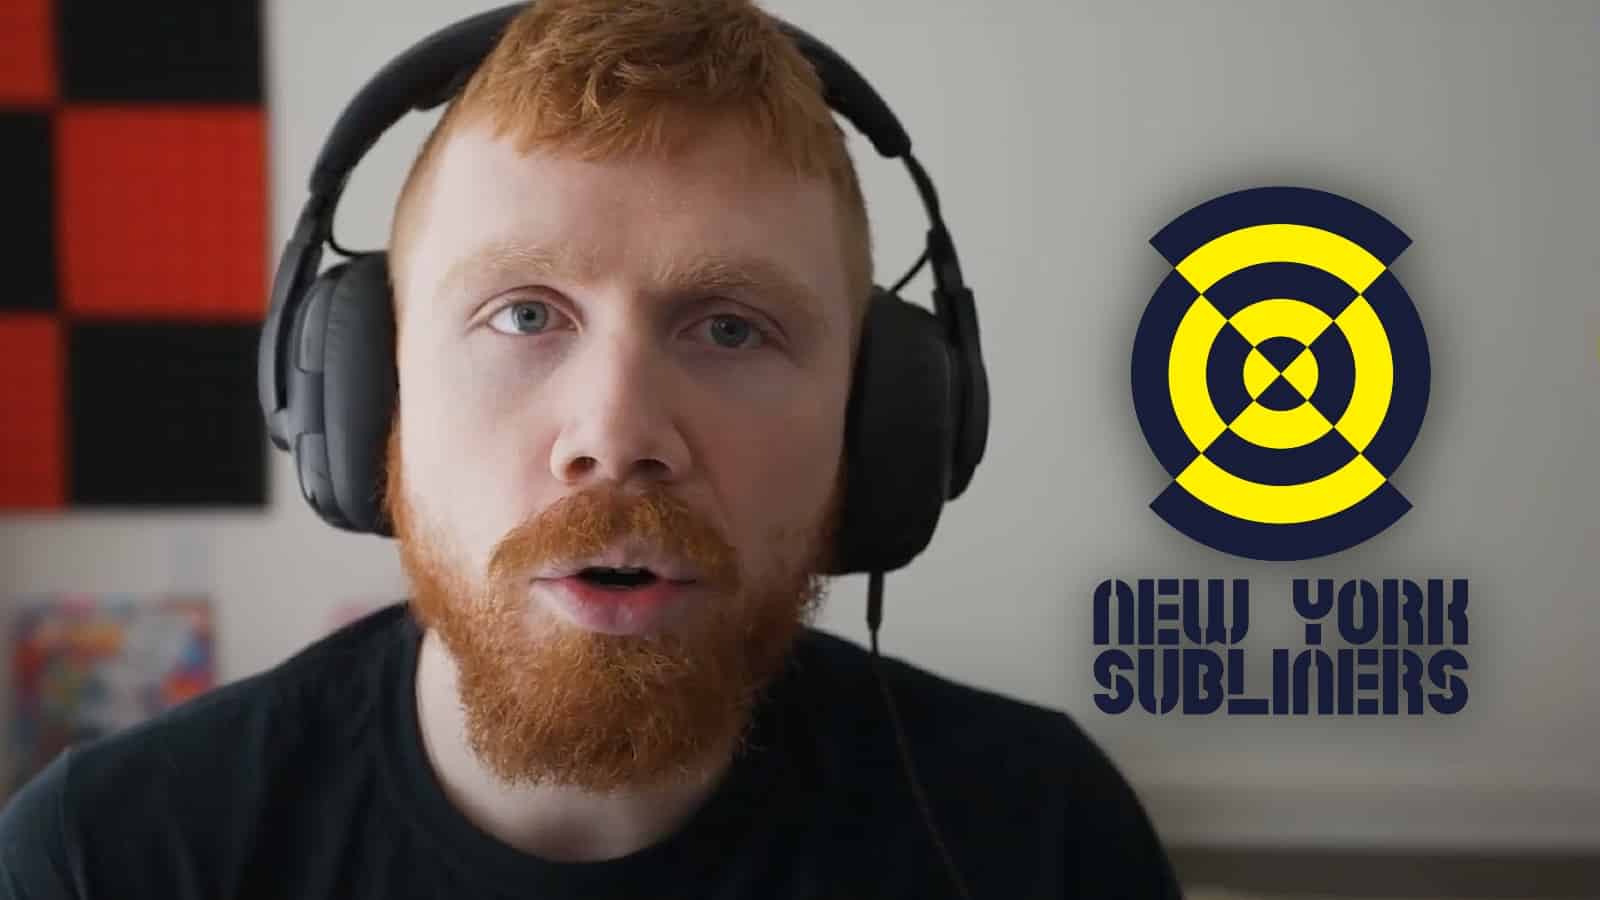 Enable explains why New York Subliners consider roster change